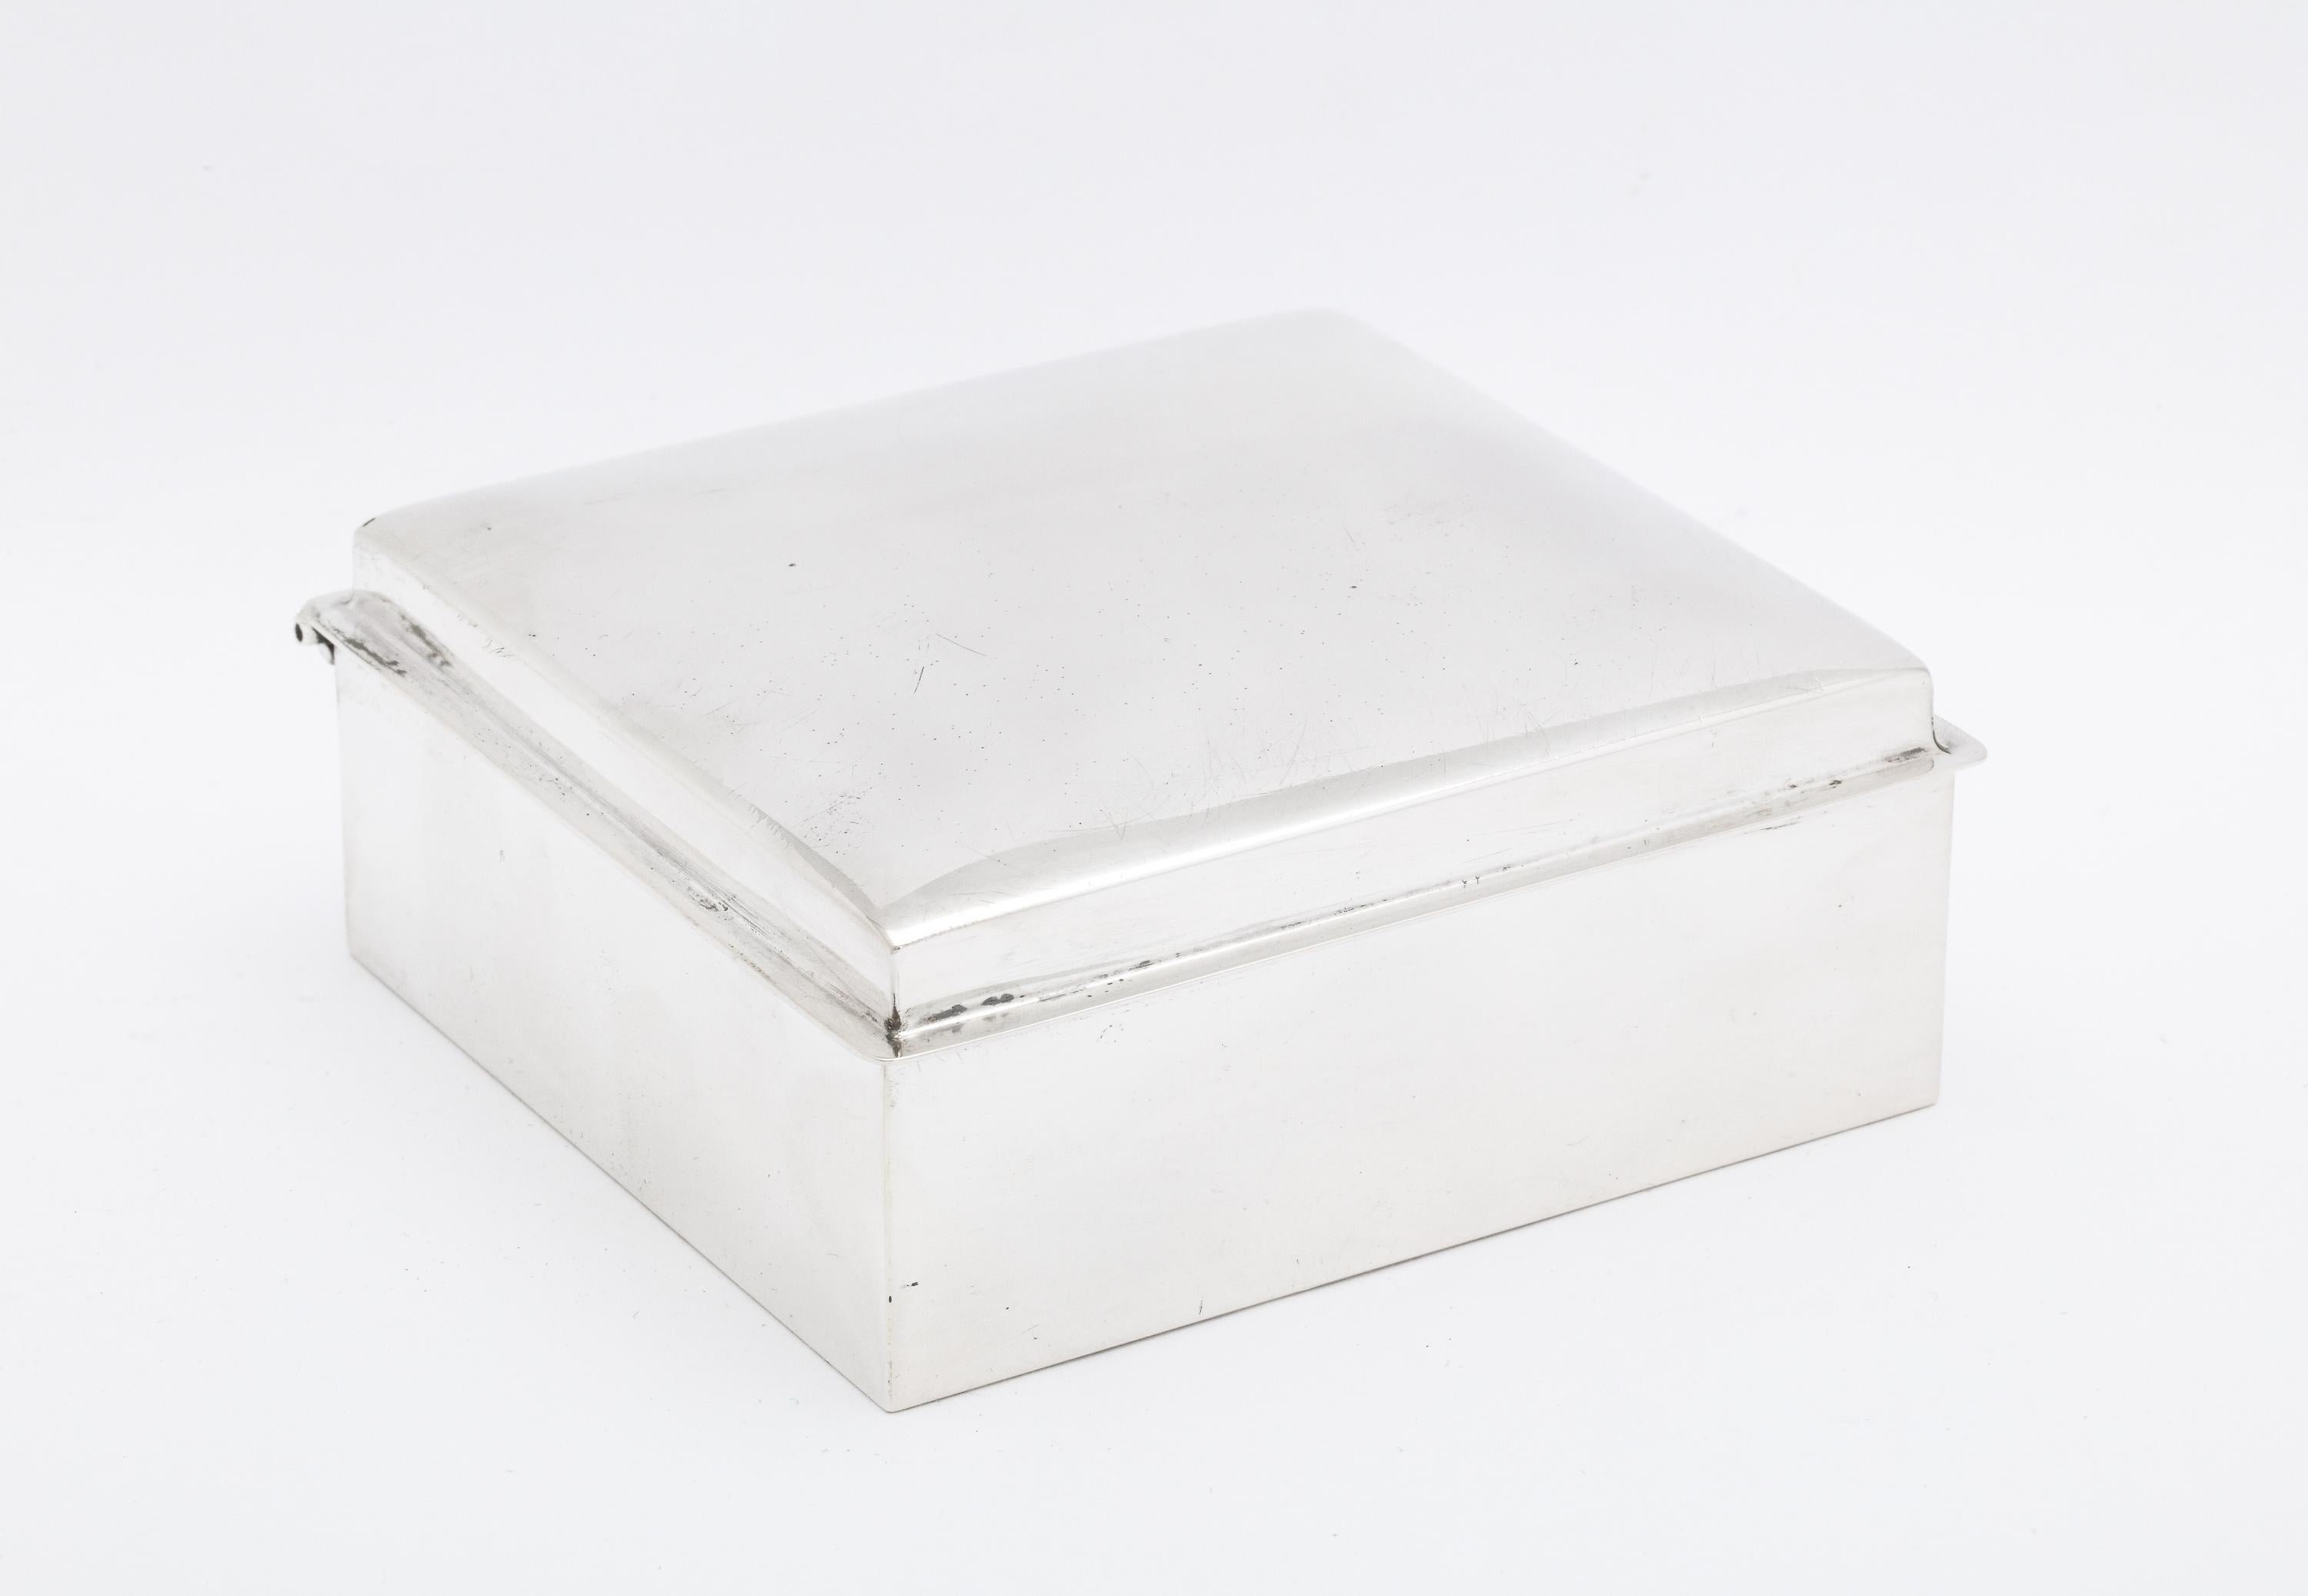 Art Deco, sterling silver table box with hinged lid, Fisher Silversmiths, Inc., New Jersey, Ca. 1935. Underside of lid is gilded; box is wood-lined. Measures 4 inches deep x 3 3/4 inches wide x 1 1/2 inches high. Minor scratches on underside and has